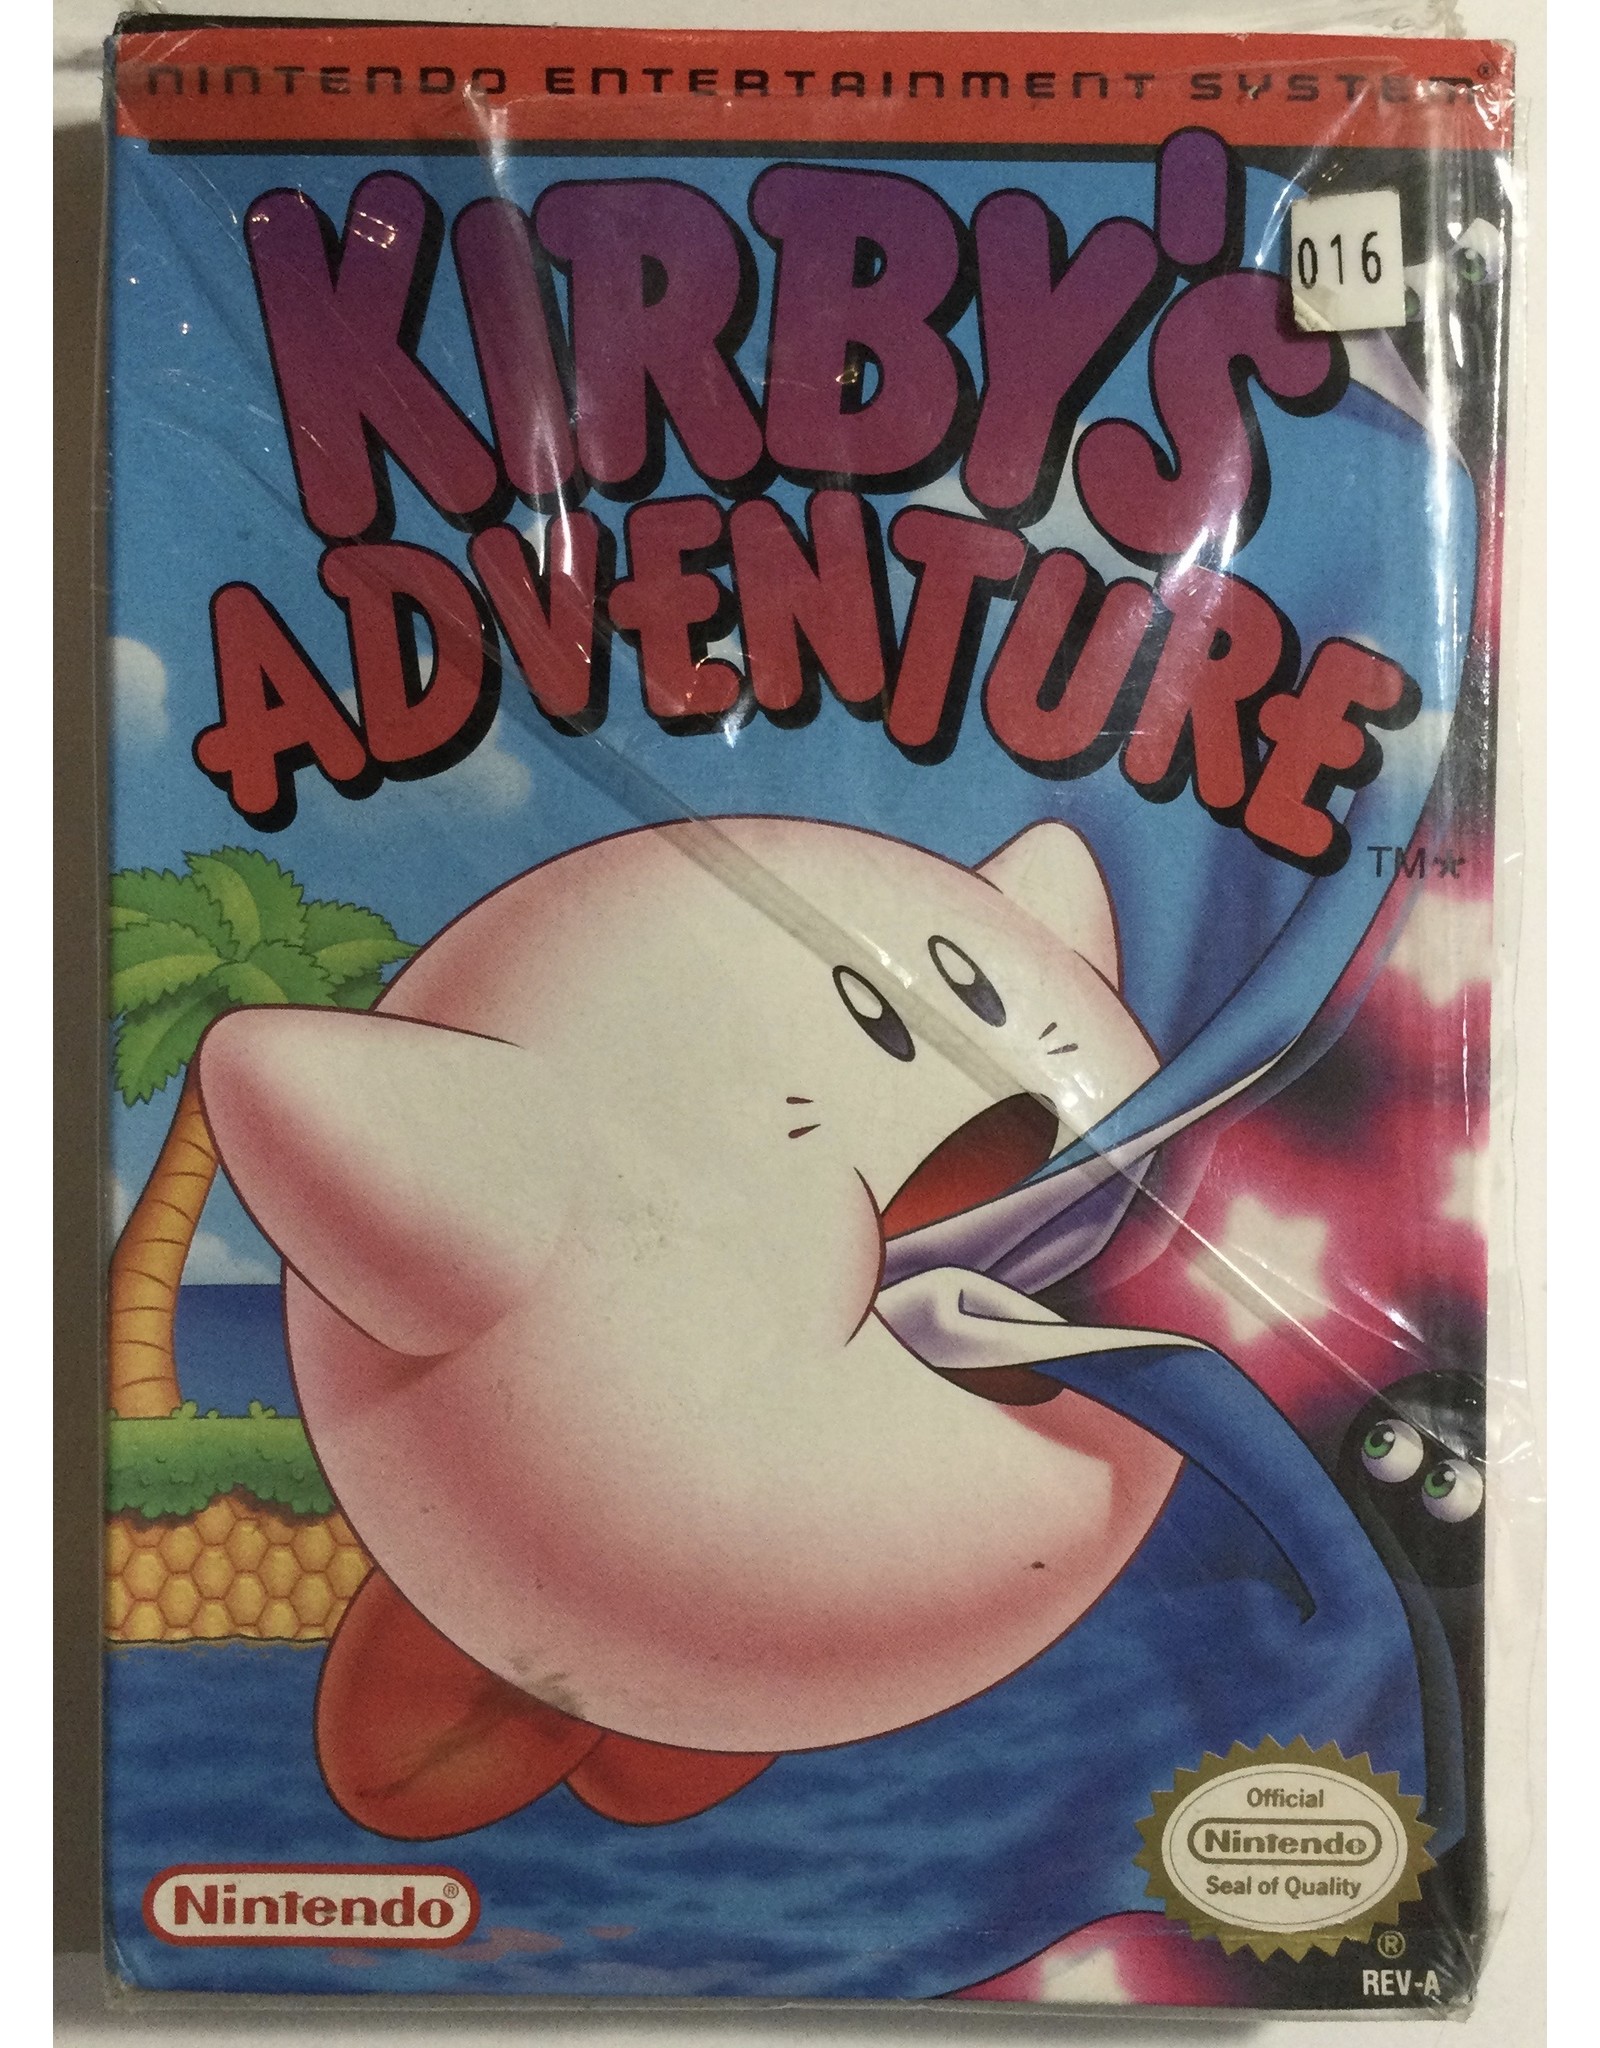 Kirby's Adventure for Nintendo Entertainment system (NES 